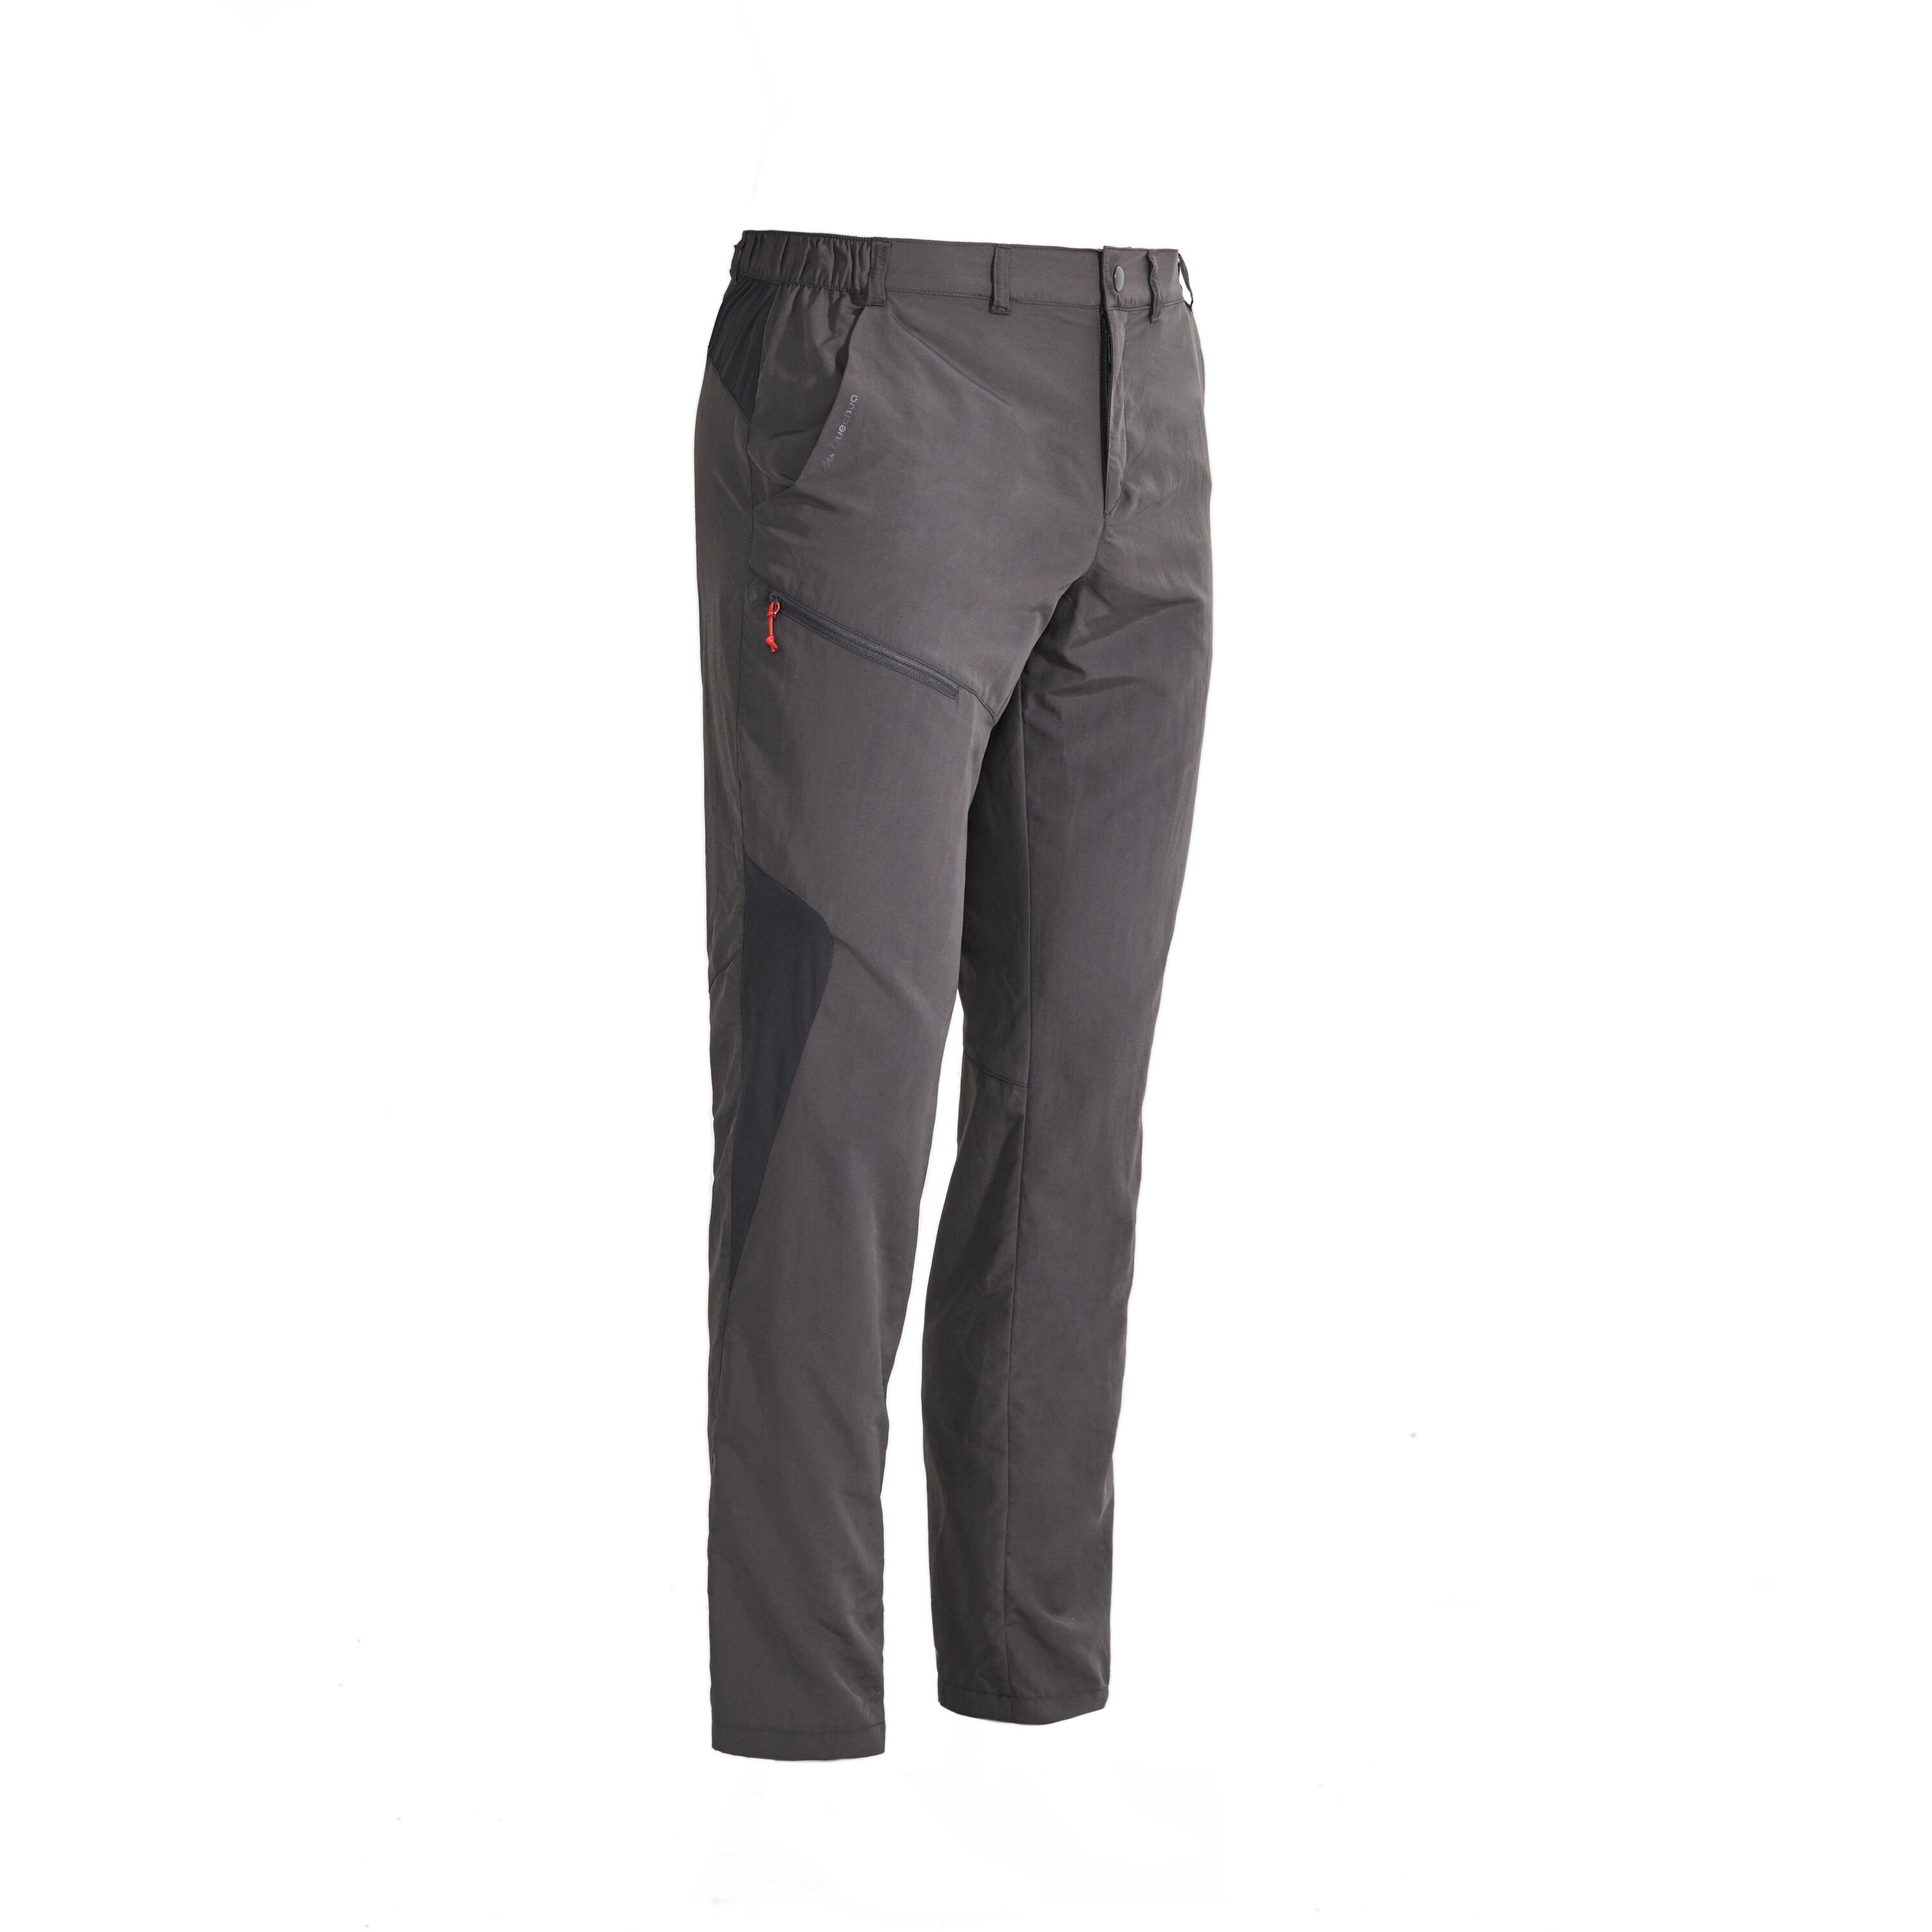 Men's Hiking Trousers - MH100 10/10